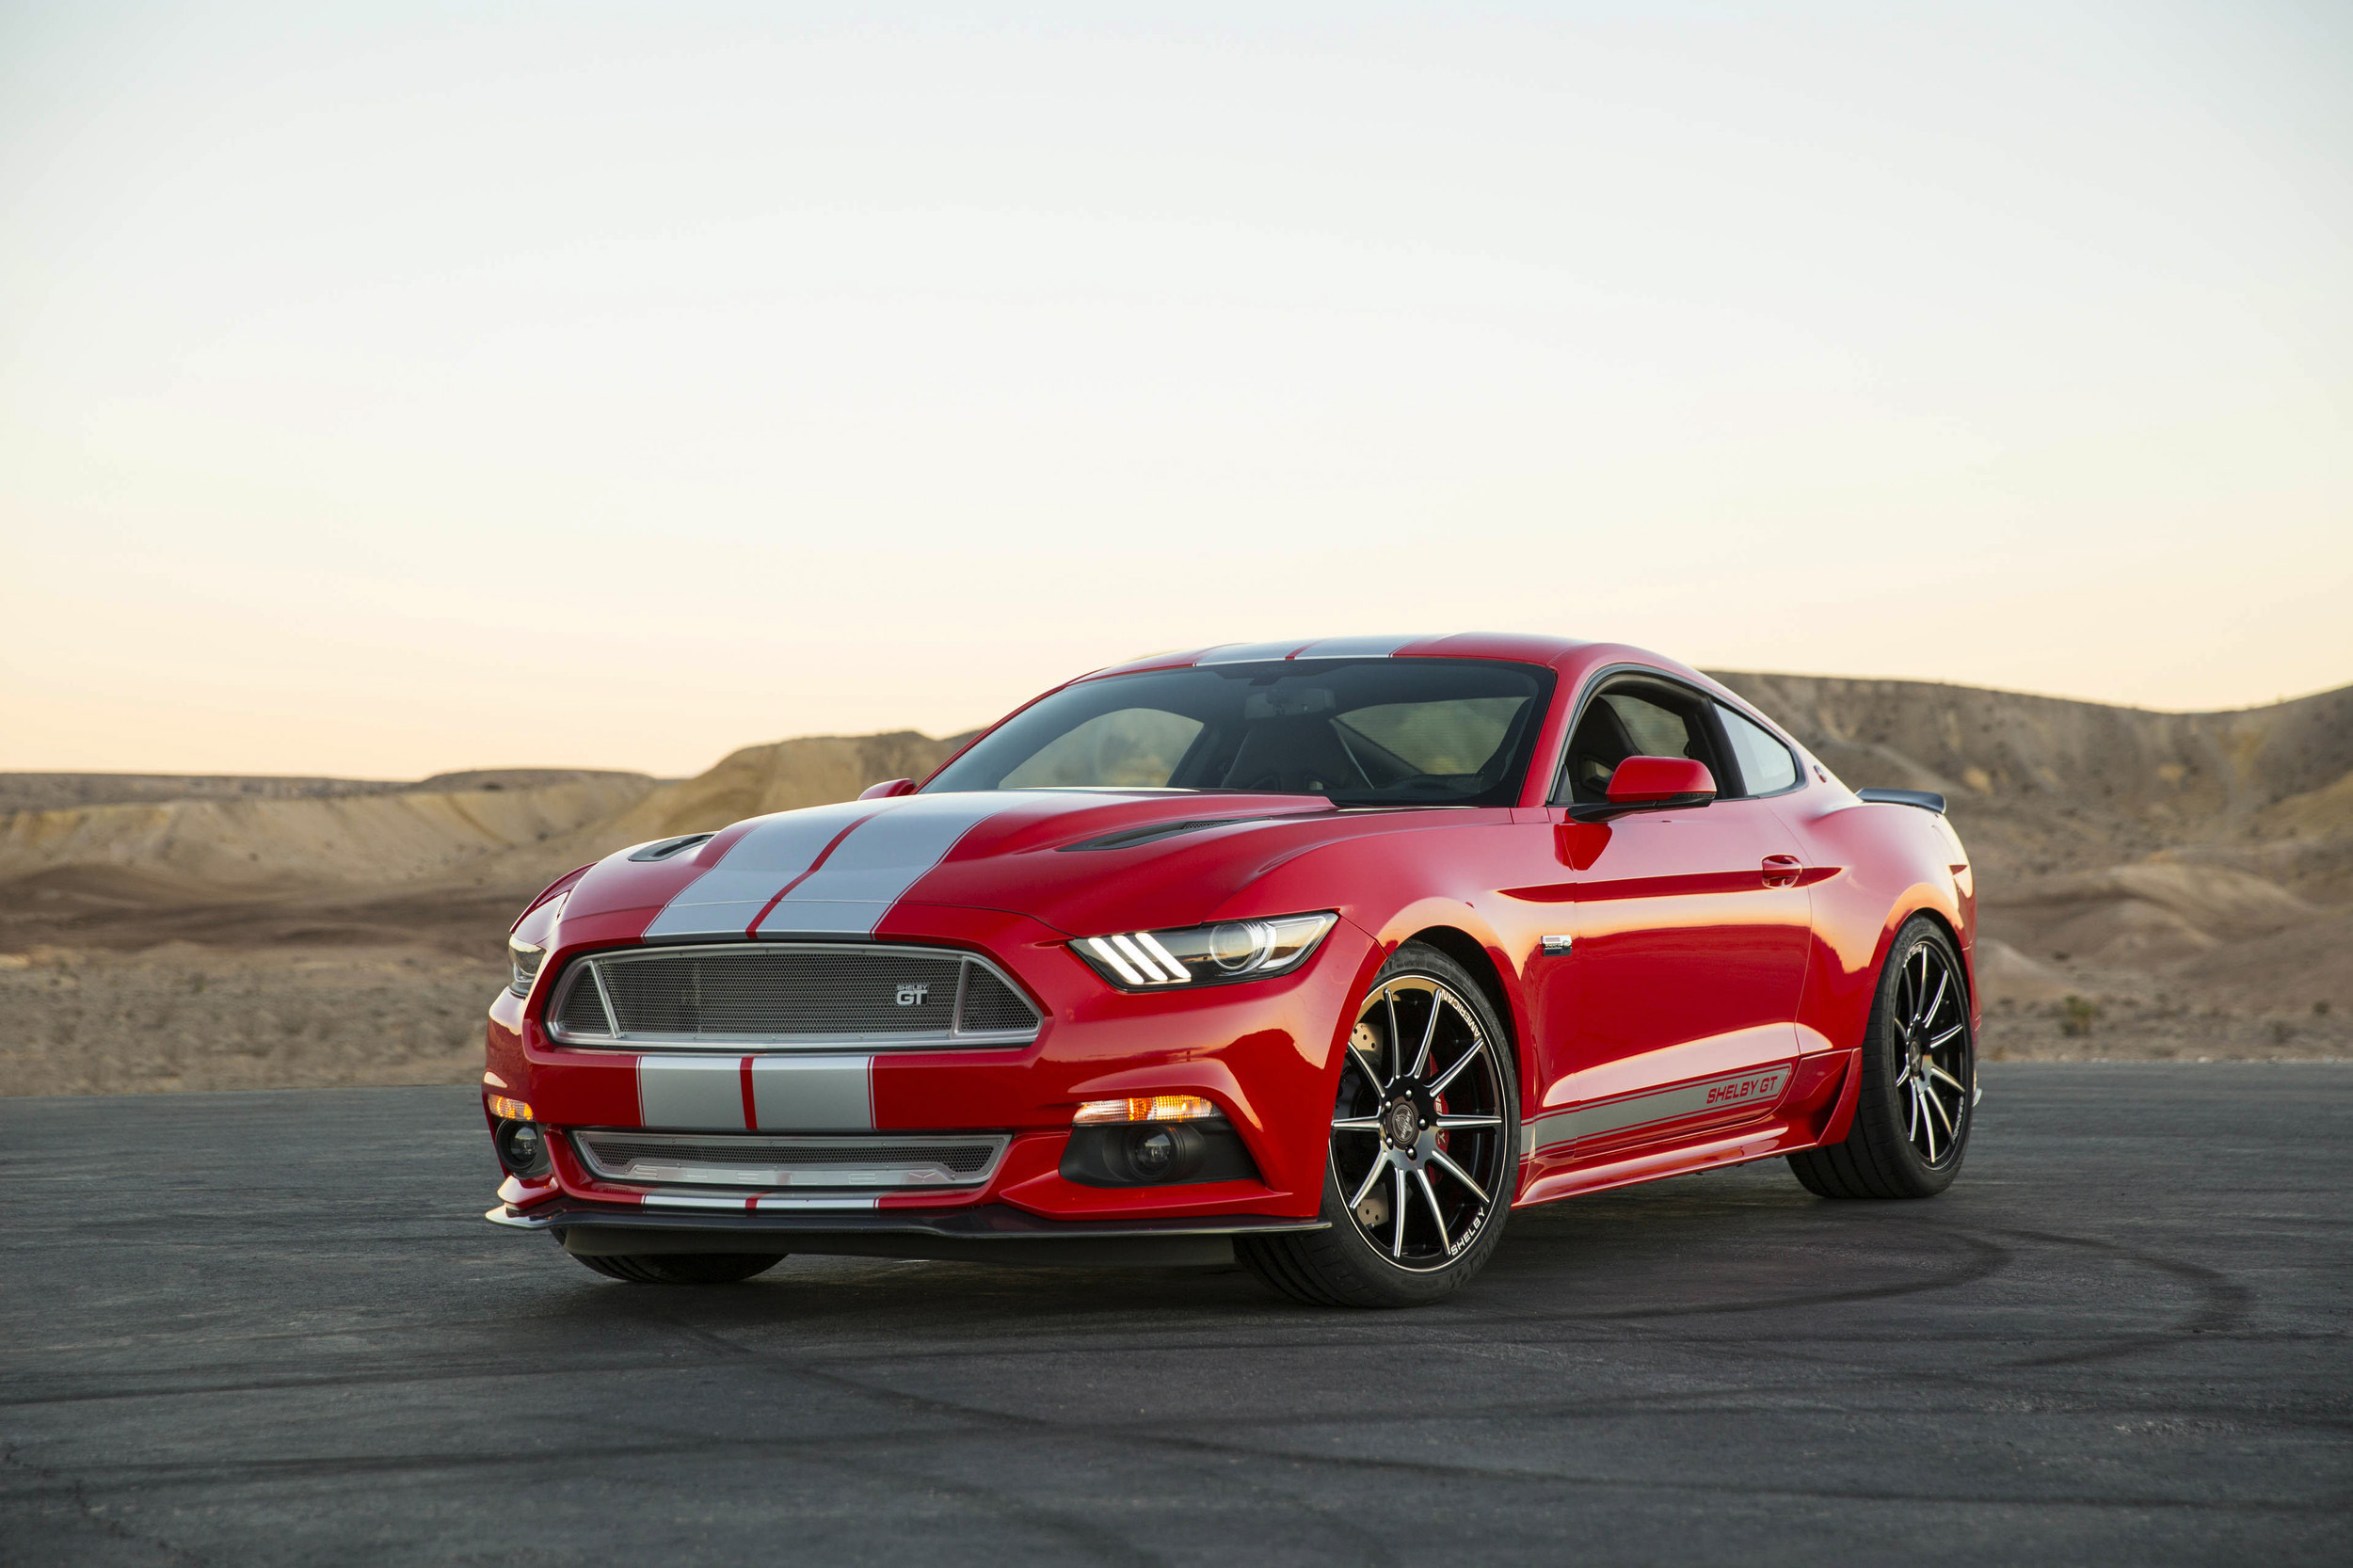 Cool Car Wallpapers 2015 Shelby Mustang New Car Wallpapers